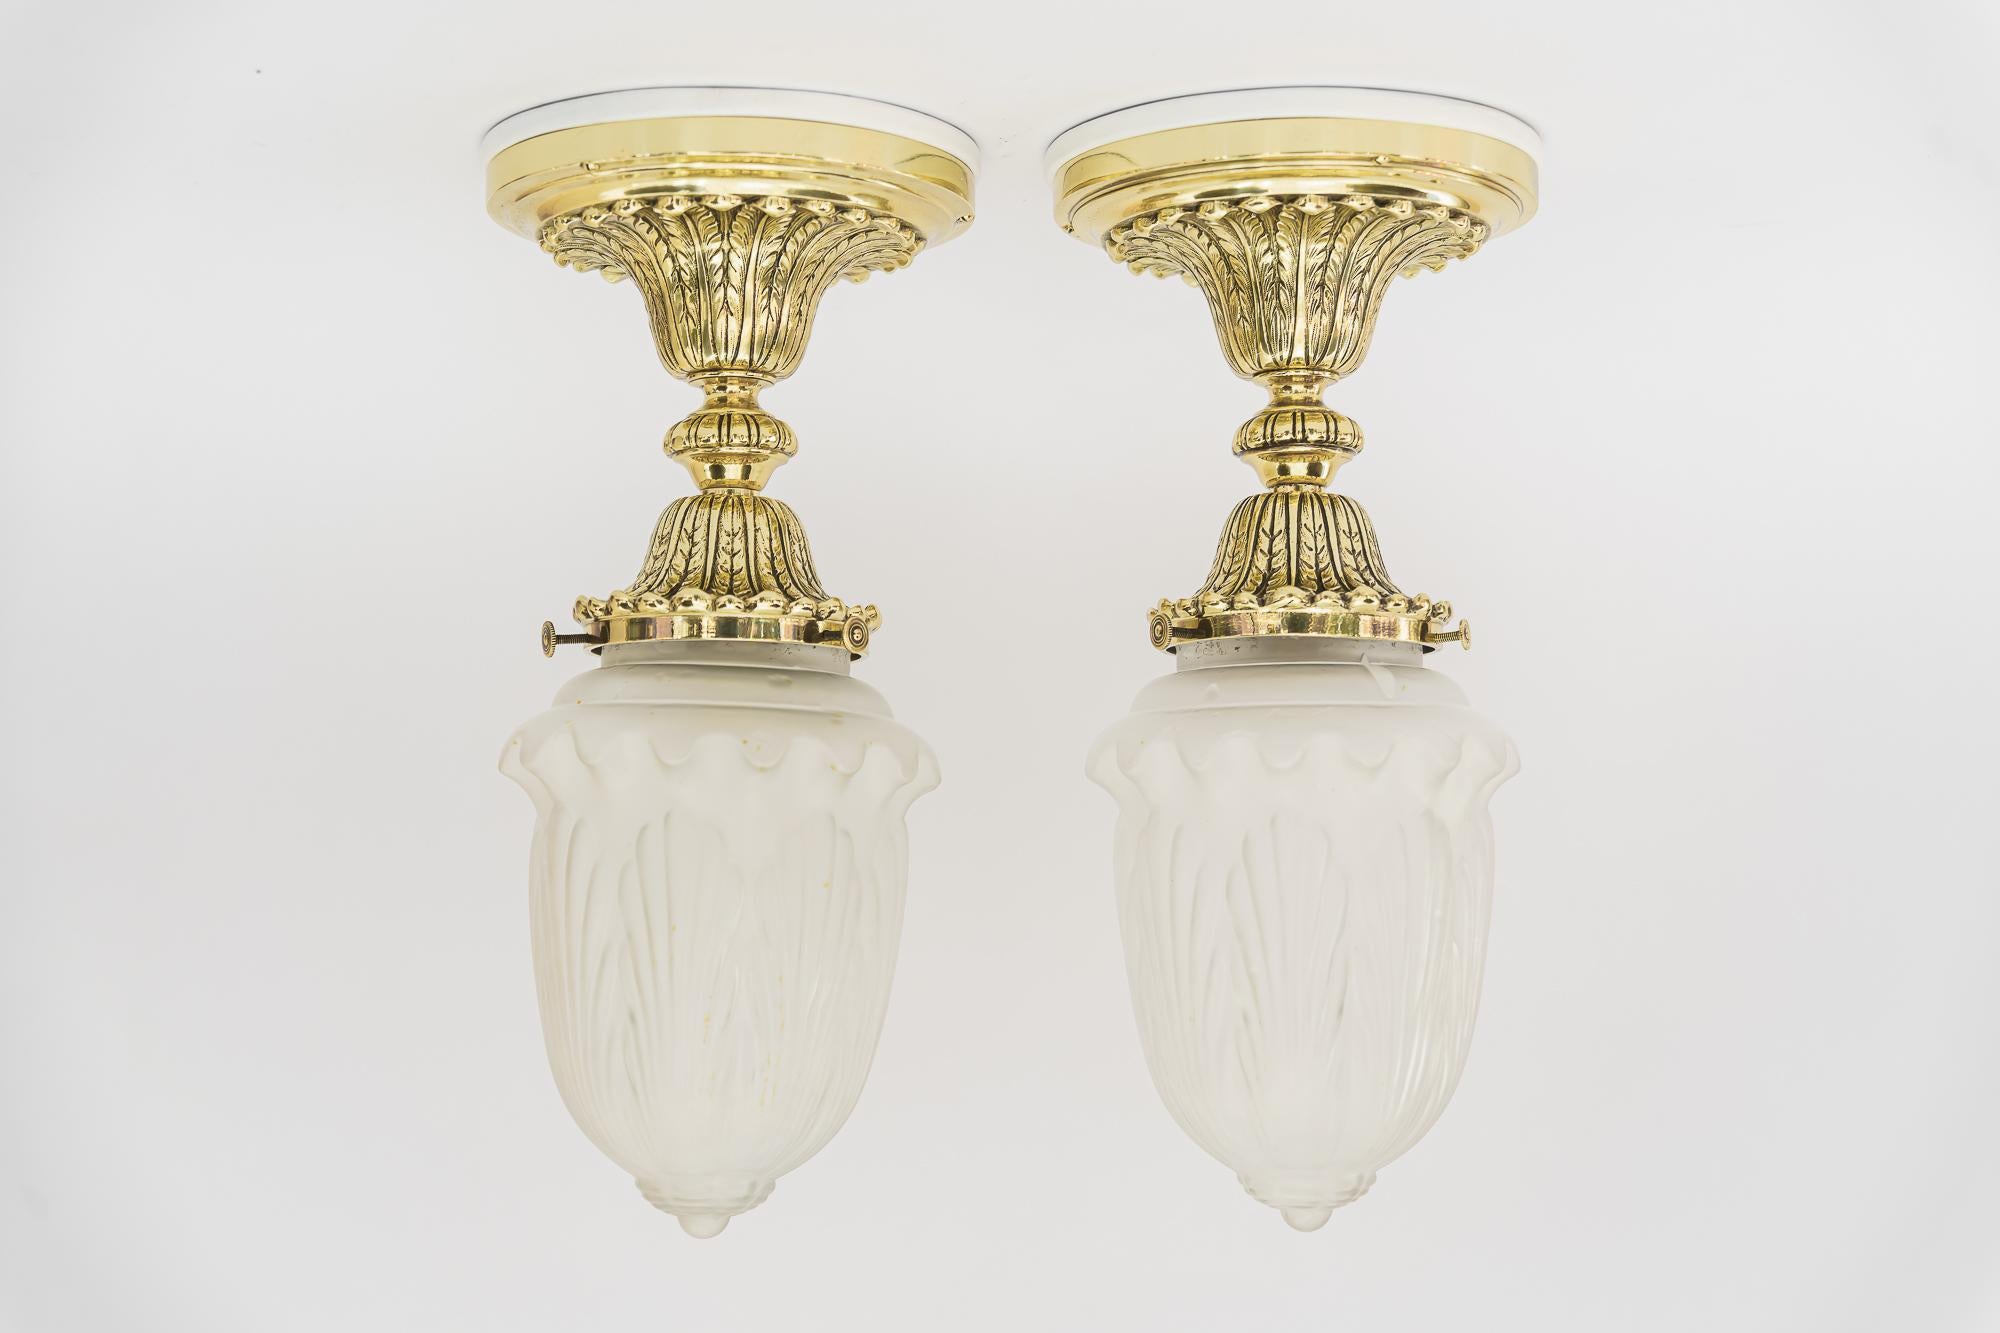 2 historistic ceiling lamps with original old glass shades vienna around 1890s
Polished and stove enameled
Wood plate white painted on top.